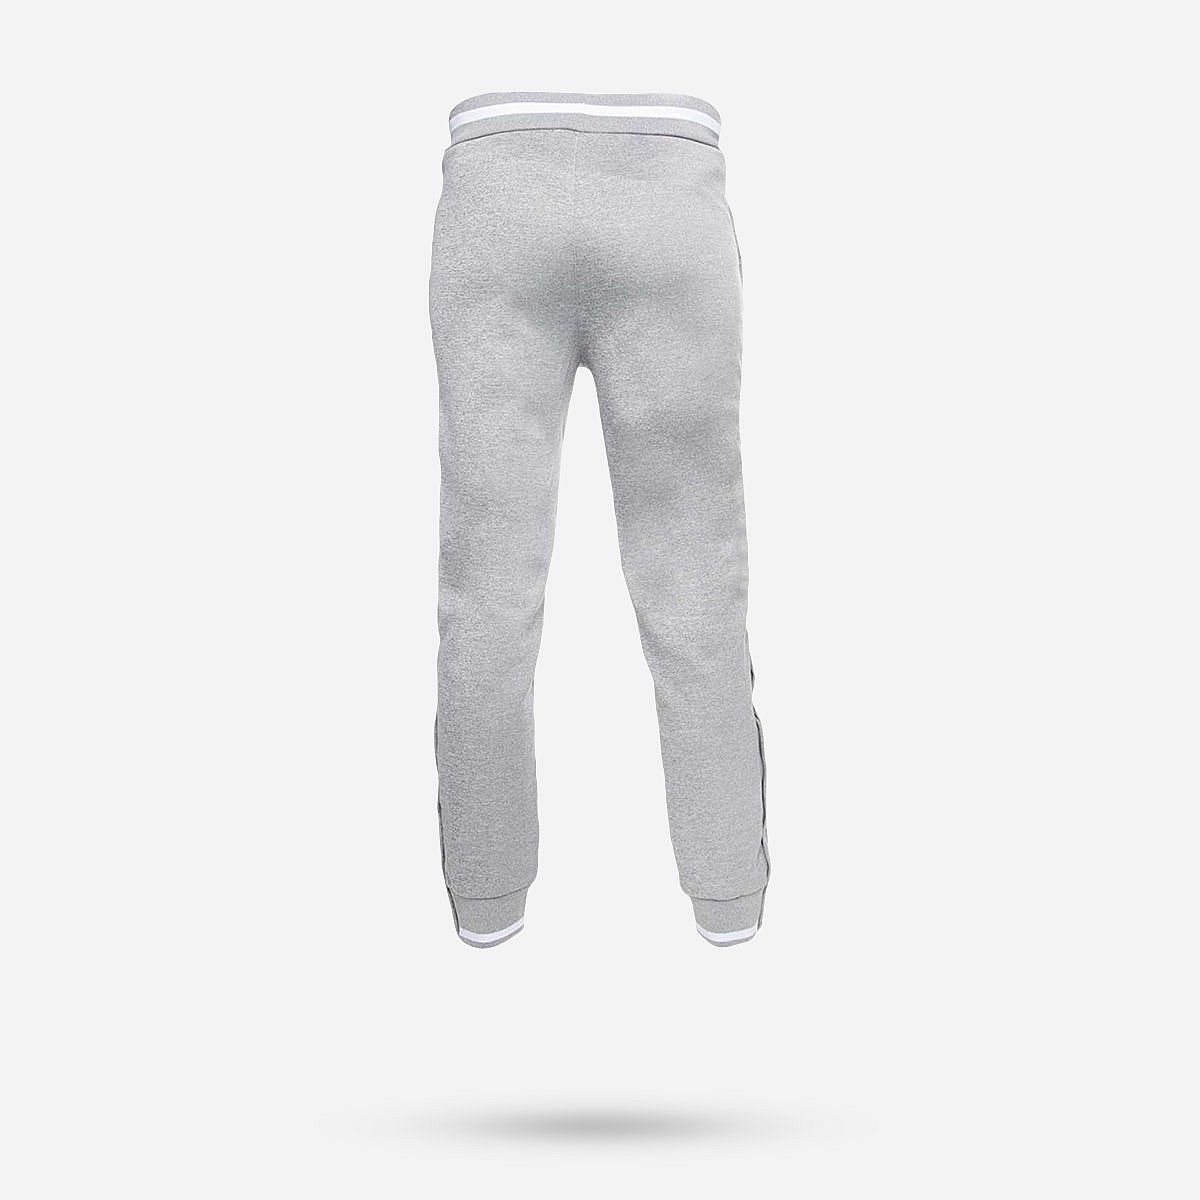 AN235271 Men's knitted pant